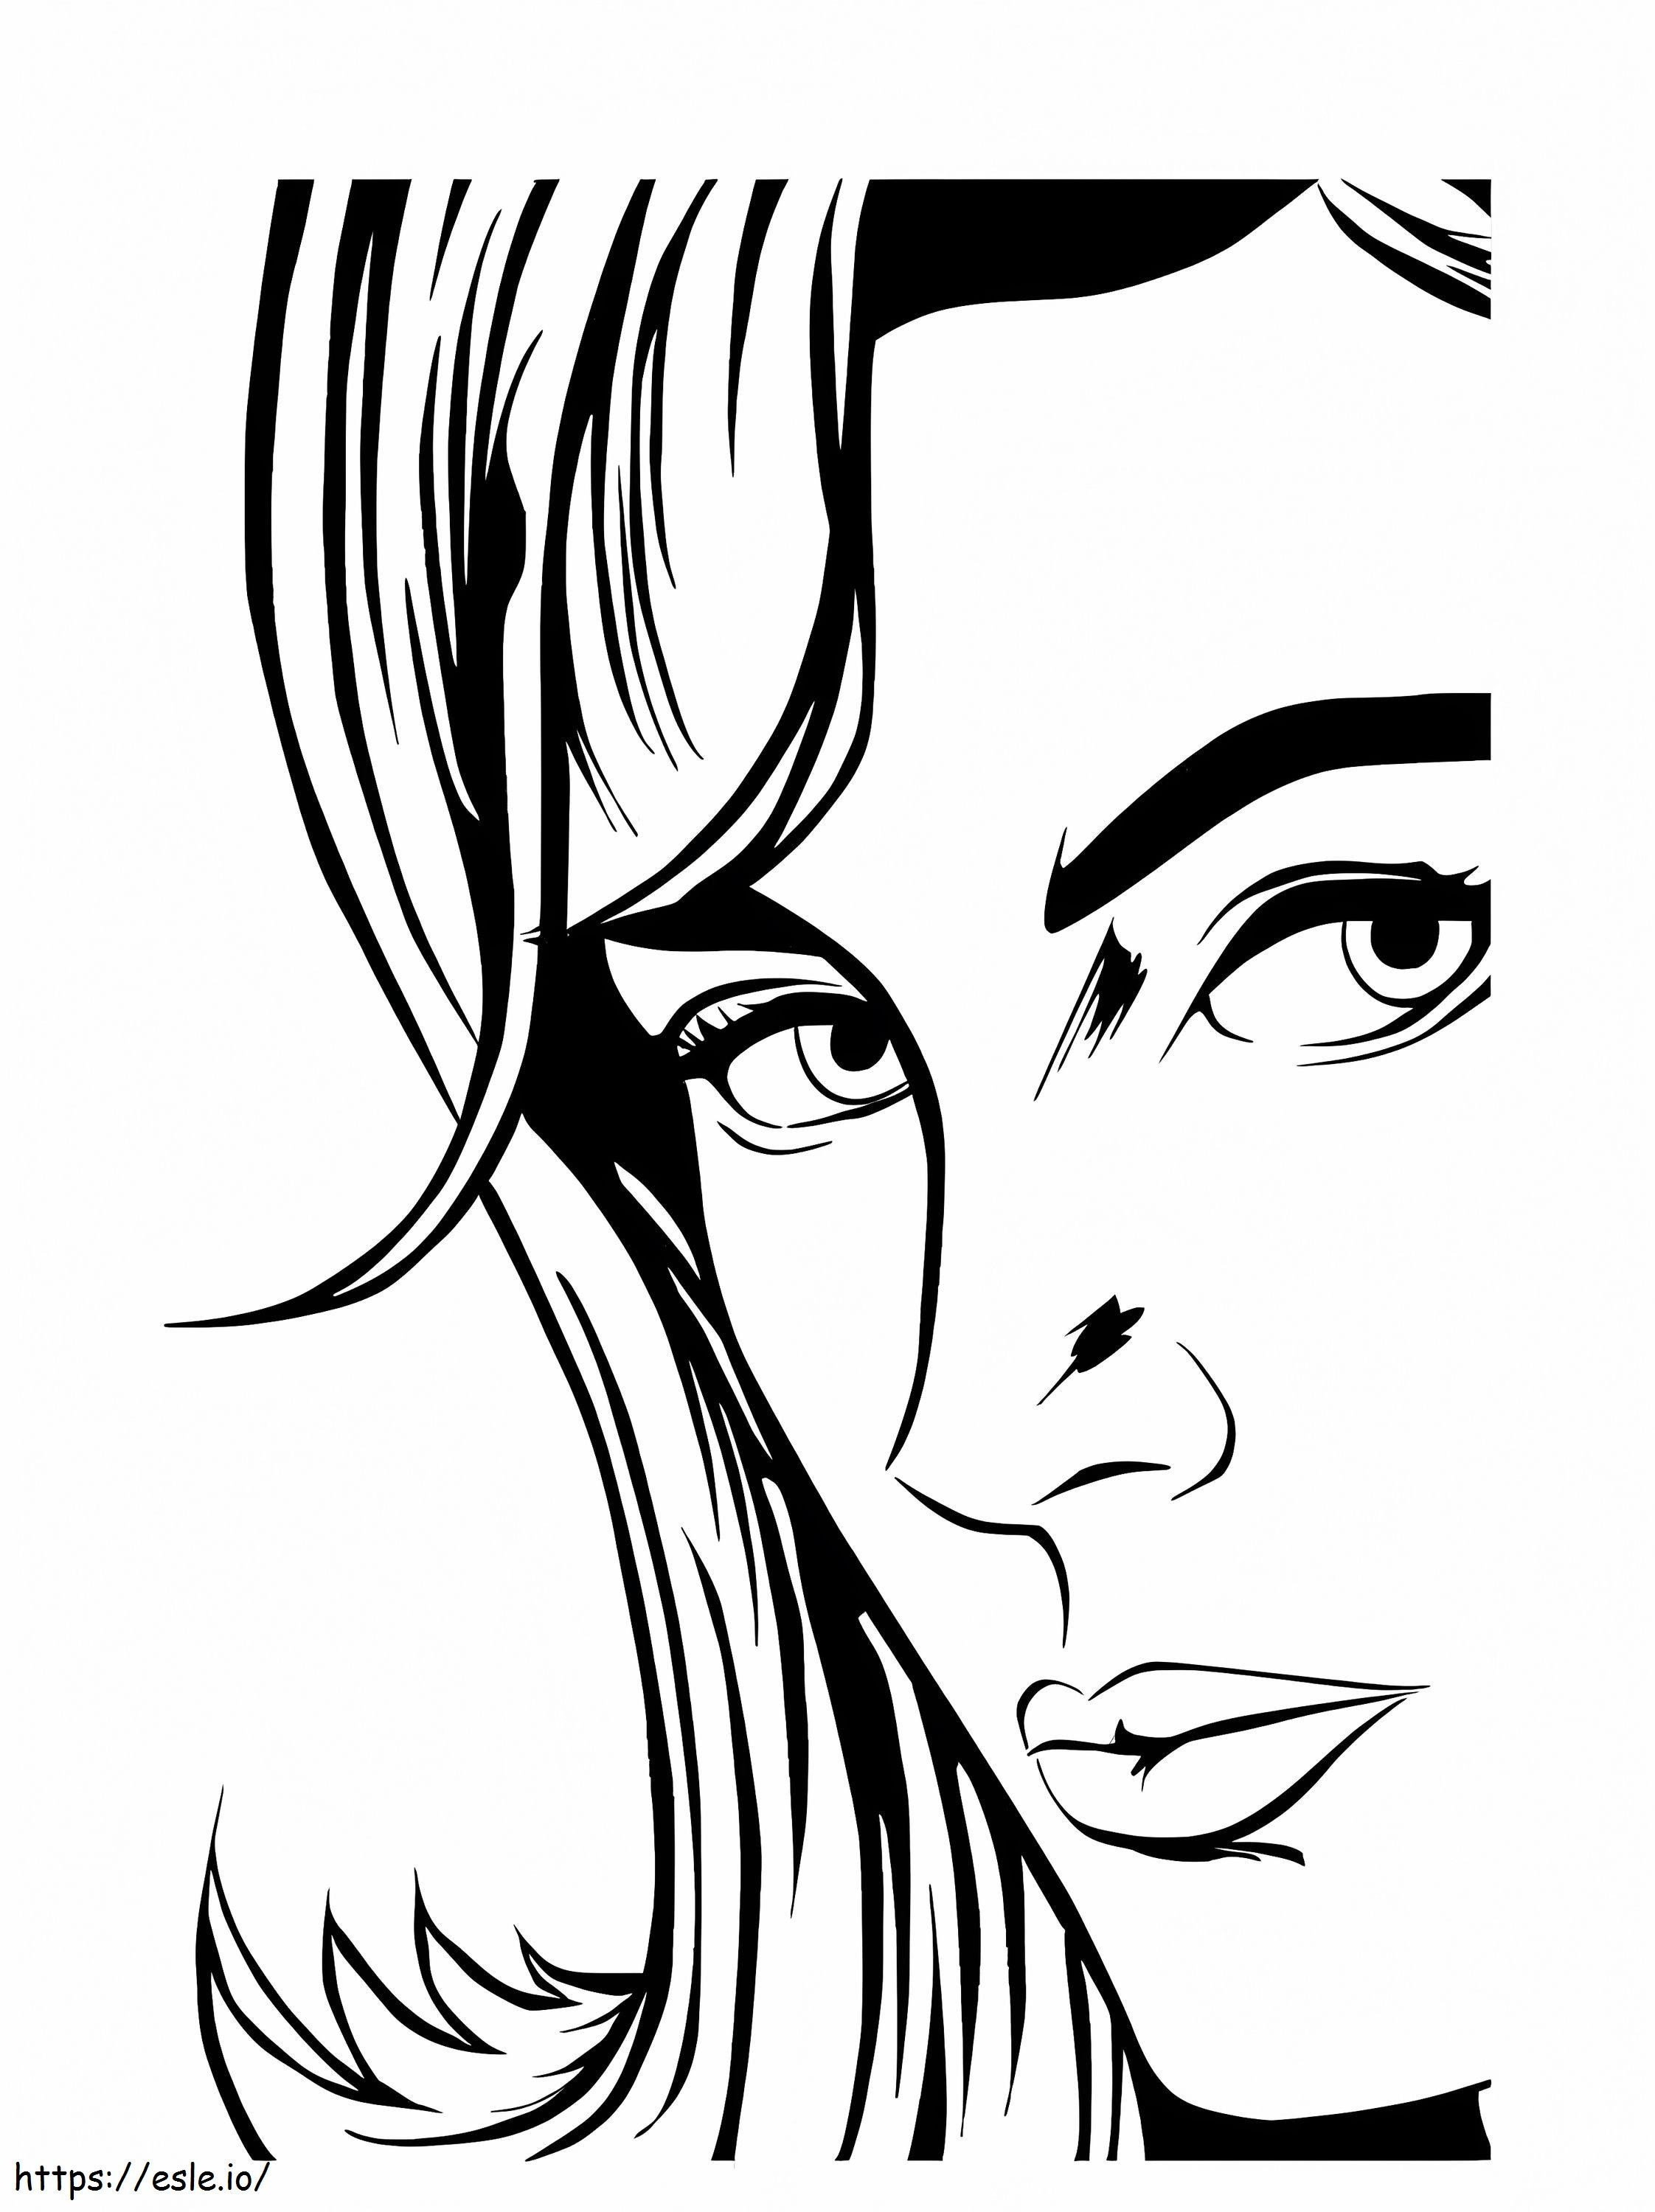 Face Of Lady Tumblr coloring page